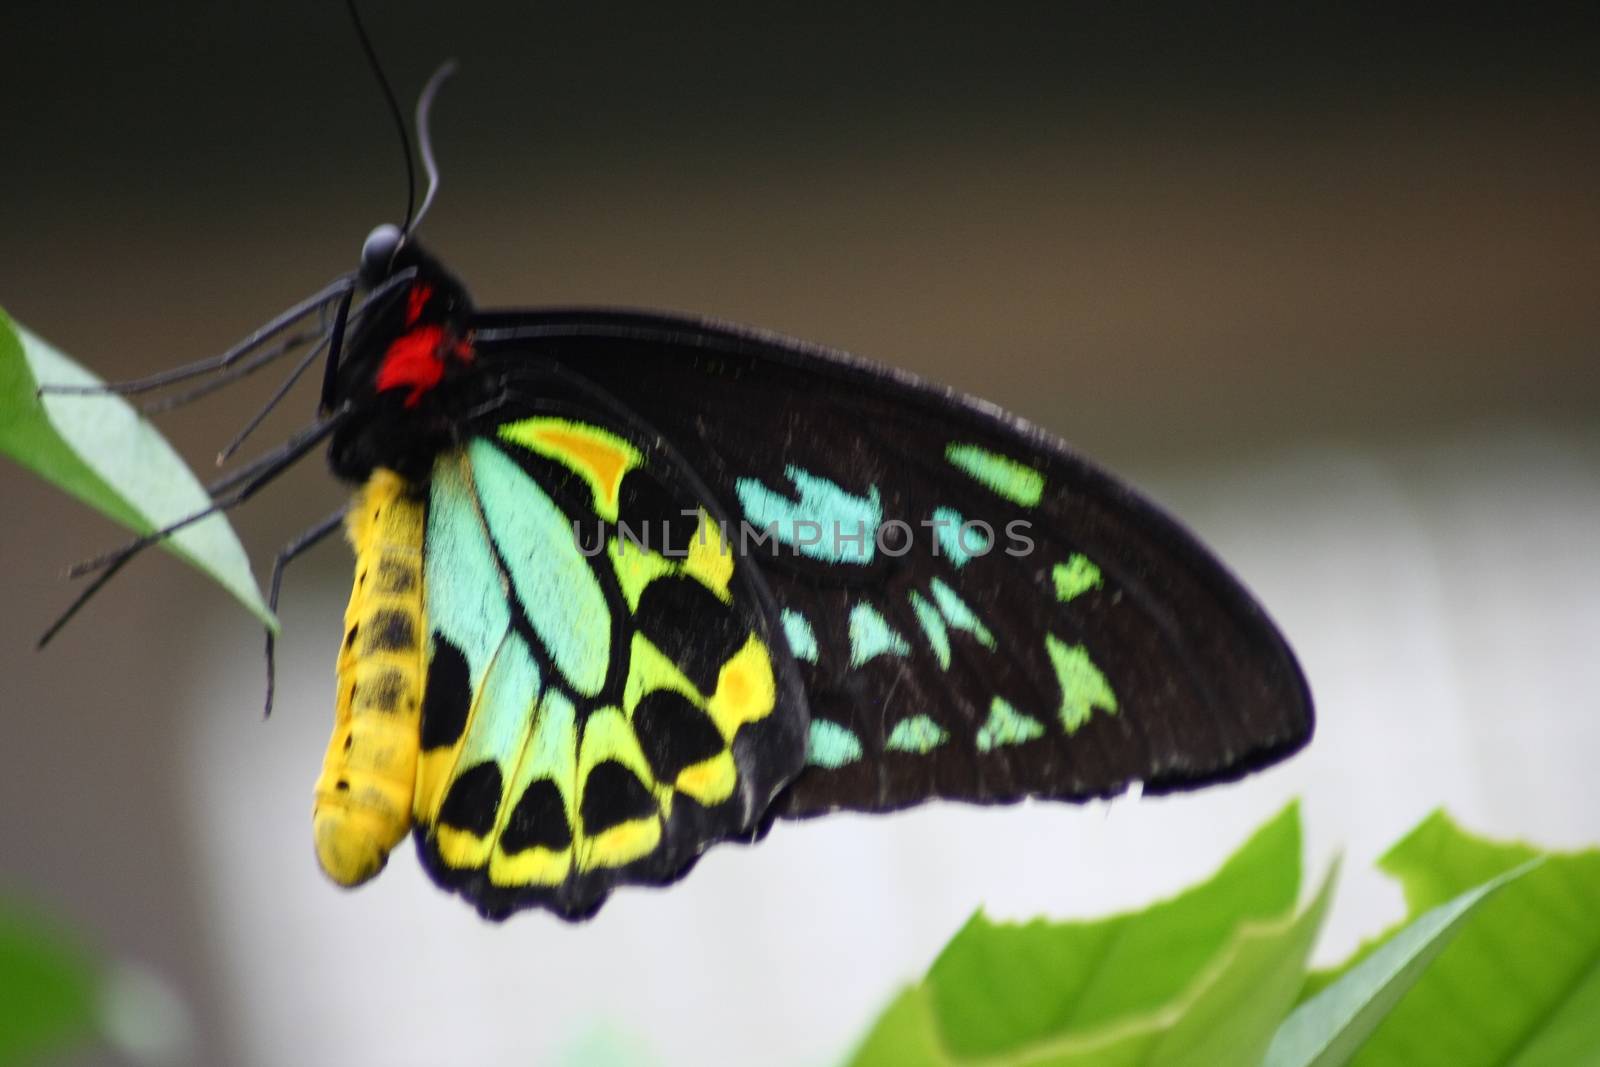 A very nice colorful butterfly